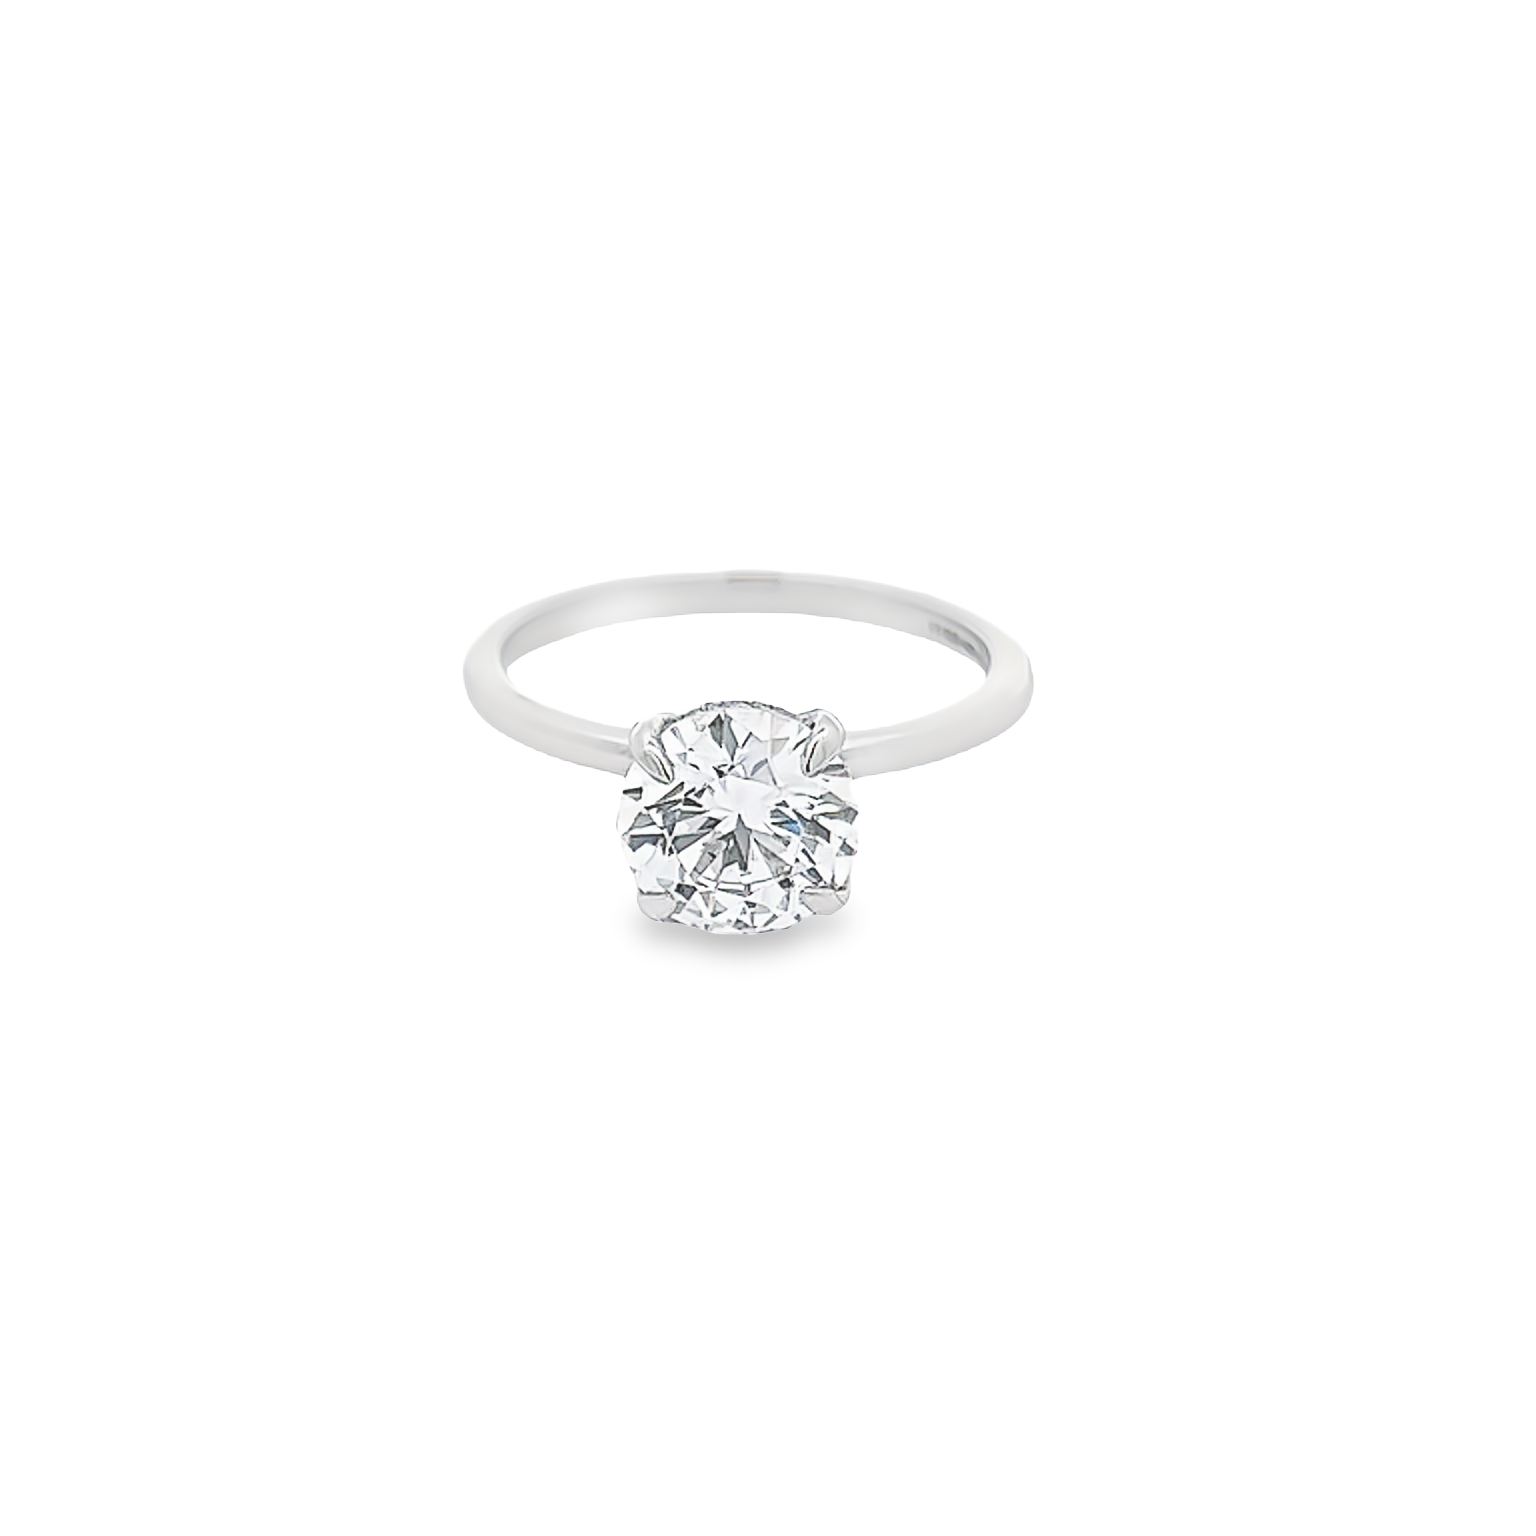 Platinum hidden halo semi mount engagement ring with 12=0.09 total weight round brilliant G VS Diamonds. Size 7